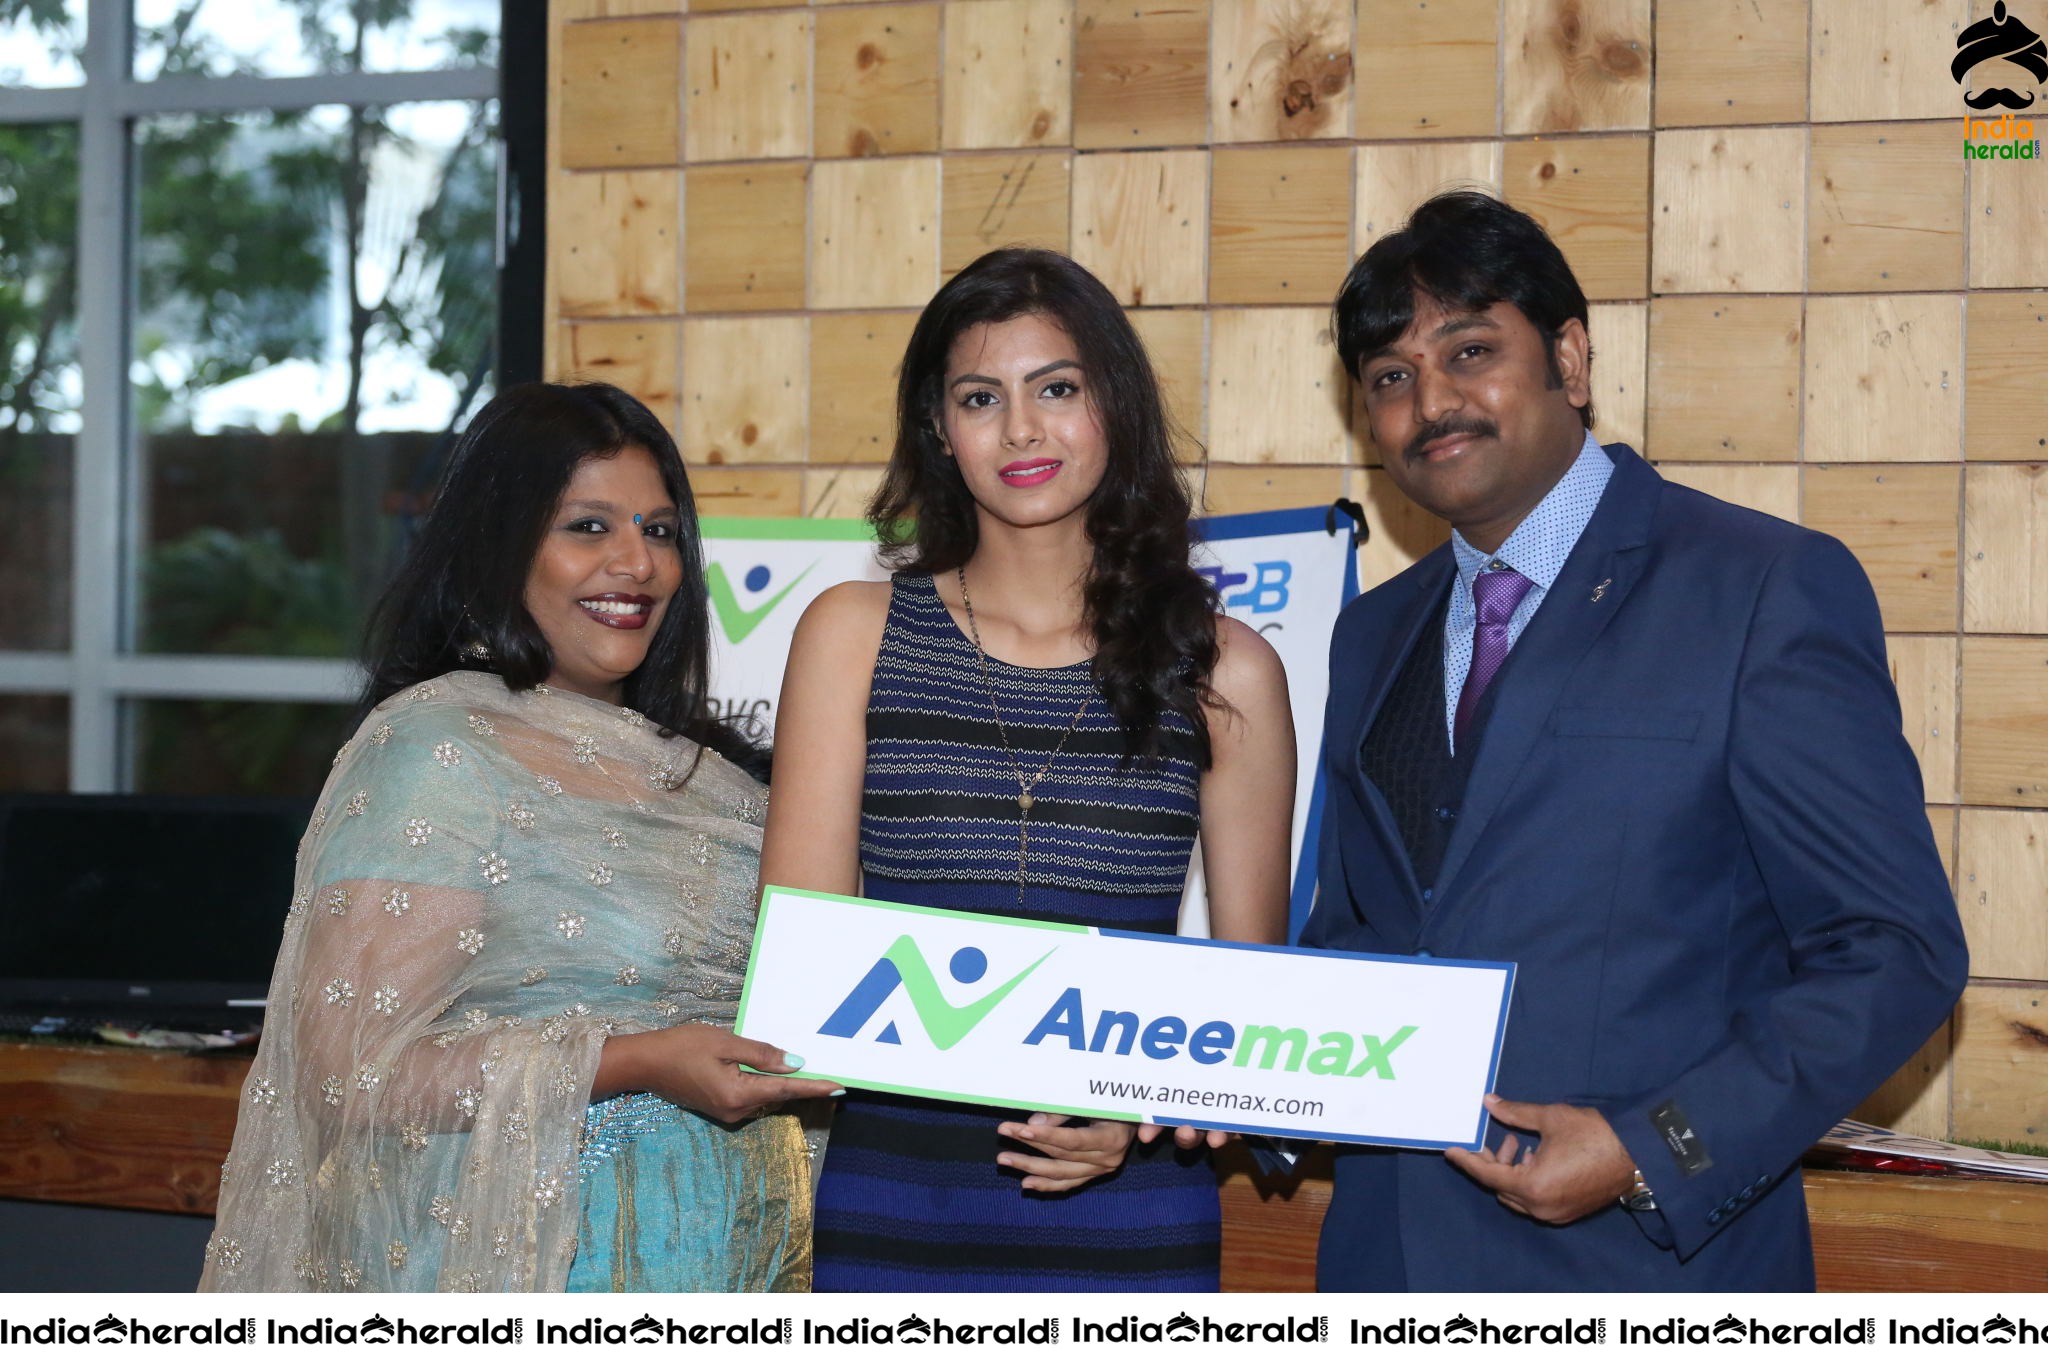 Boolywood Actress Juhee Khan Grand Launched Aneemax Digital Business Card Set 2